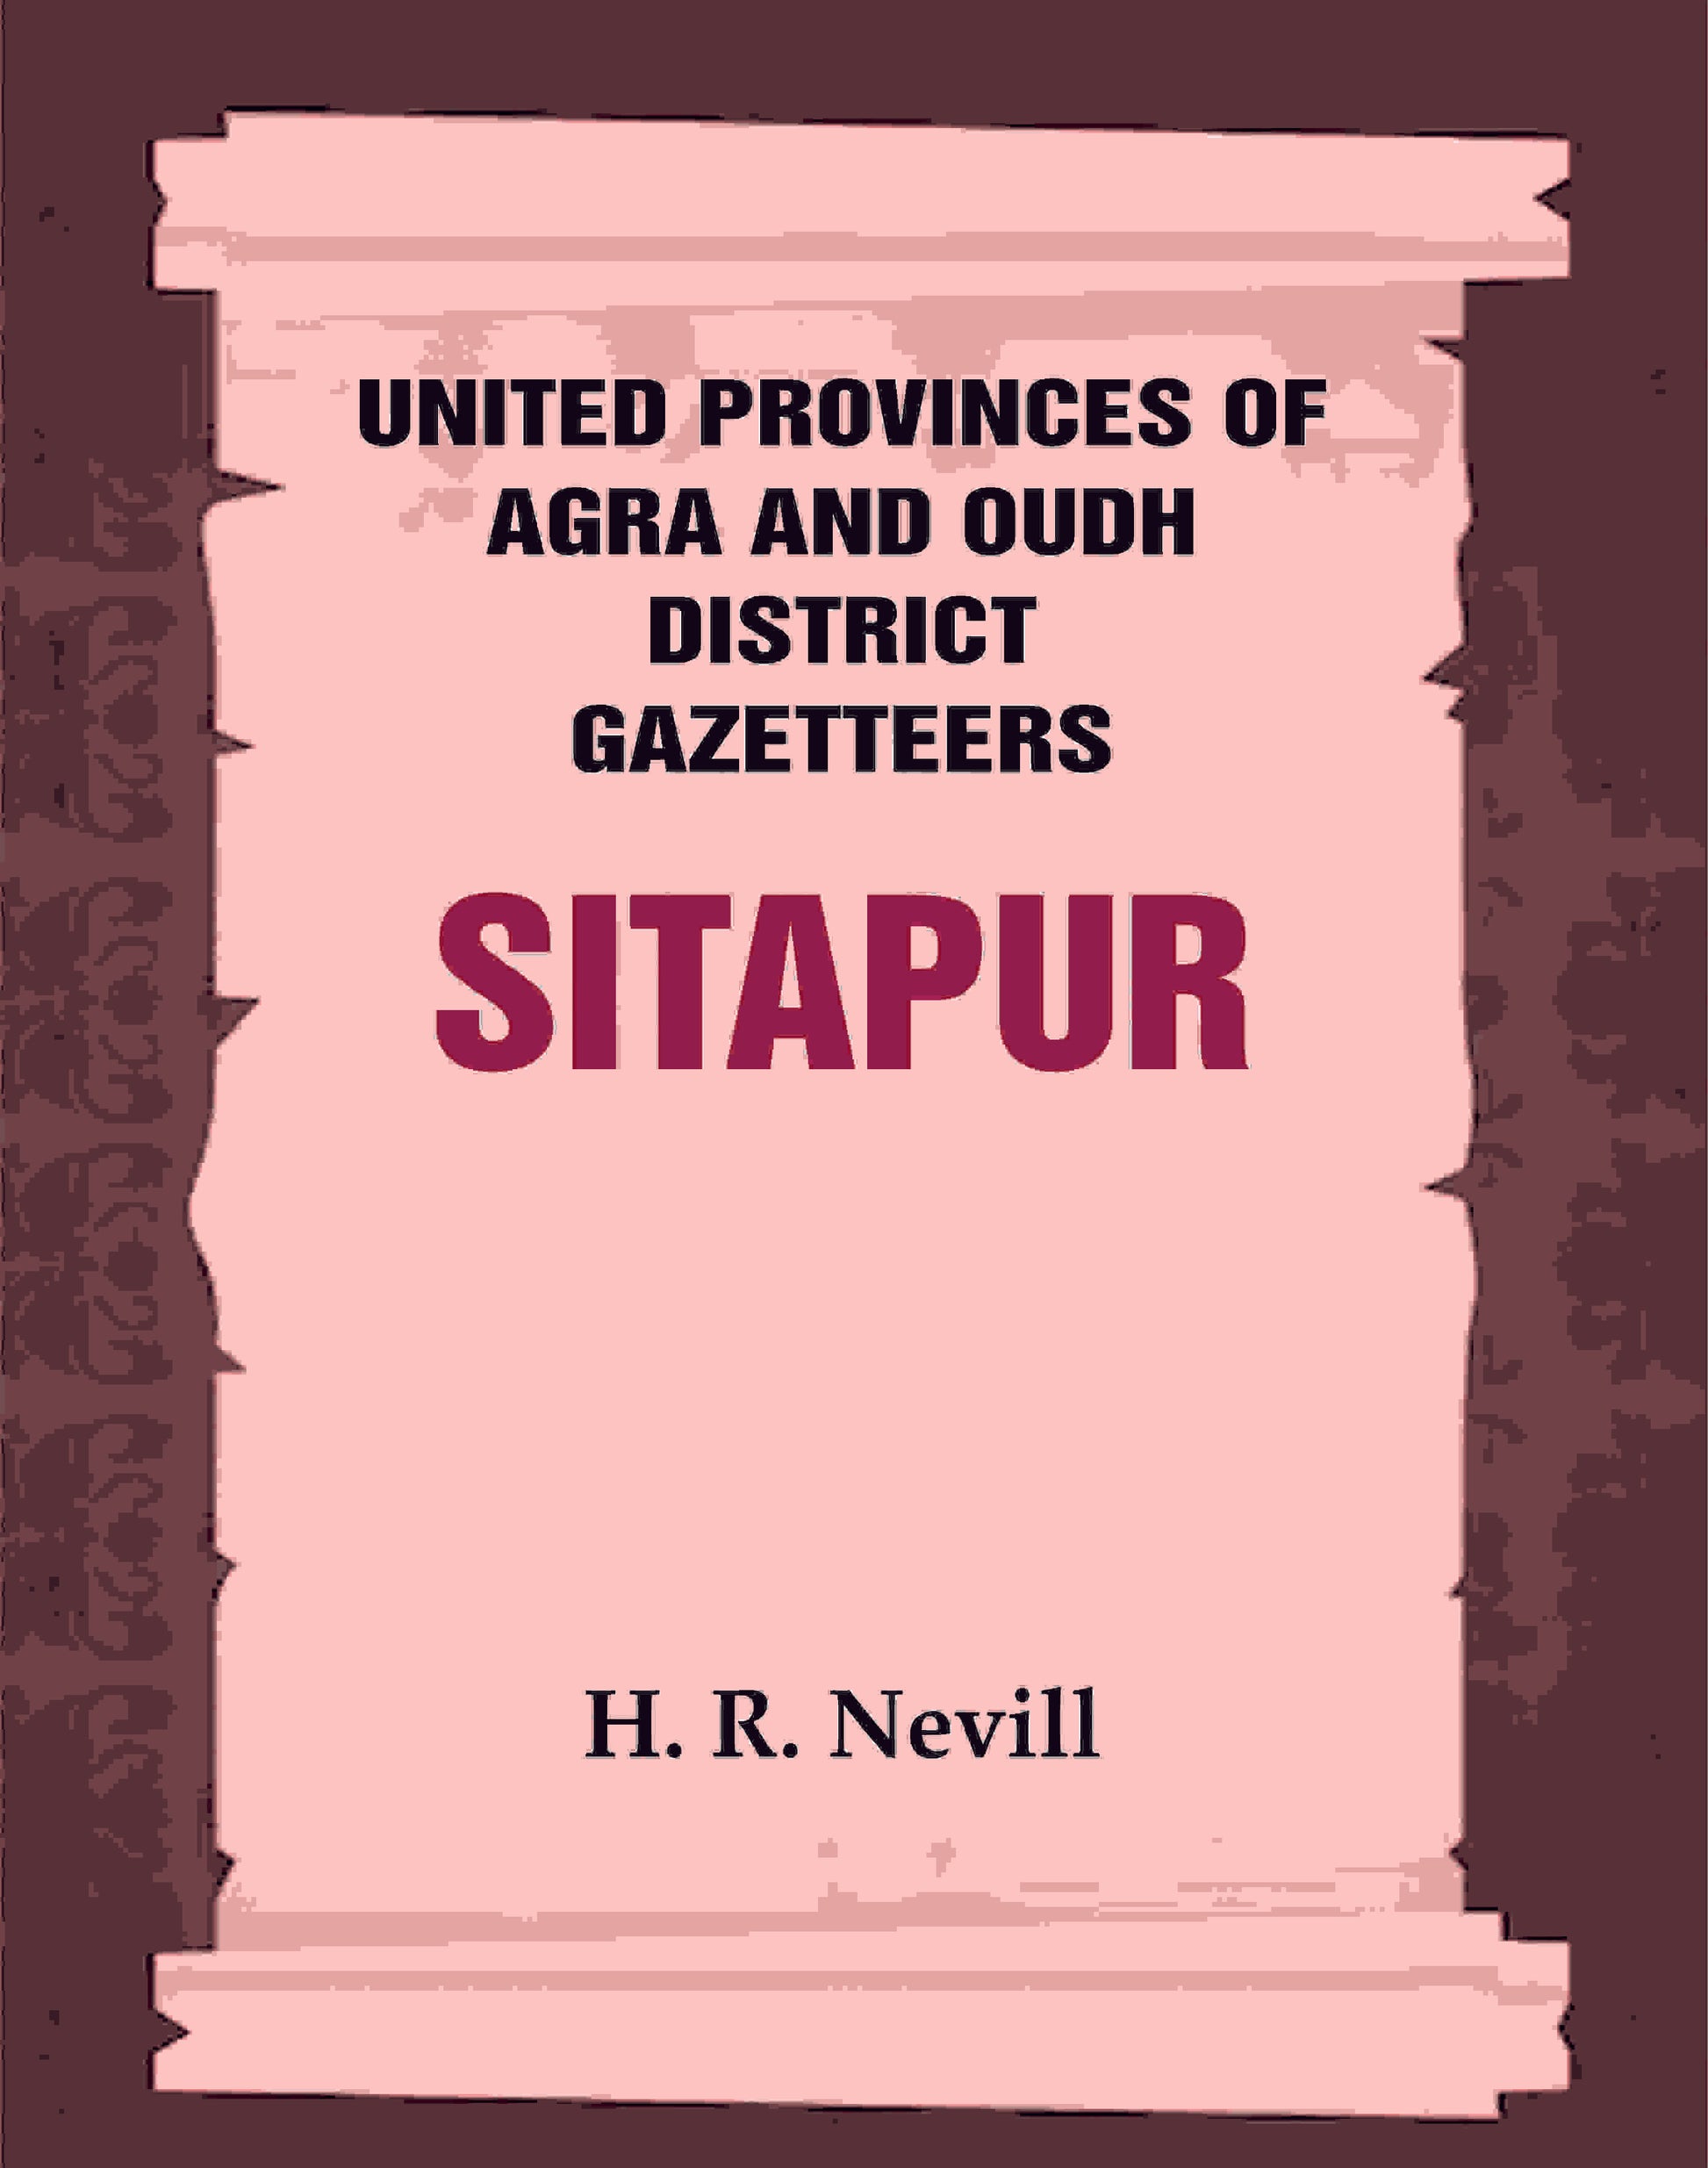 United Provinces of Agra and Oudh District Gazetteers: Sitapur